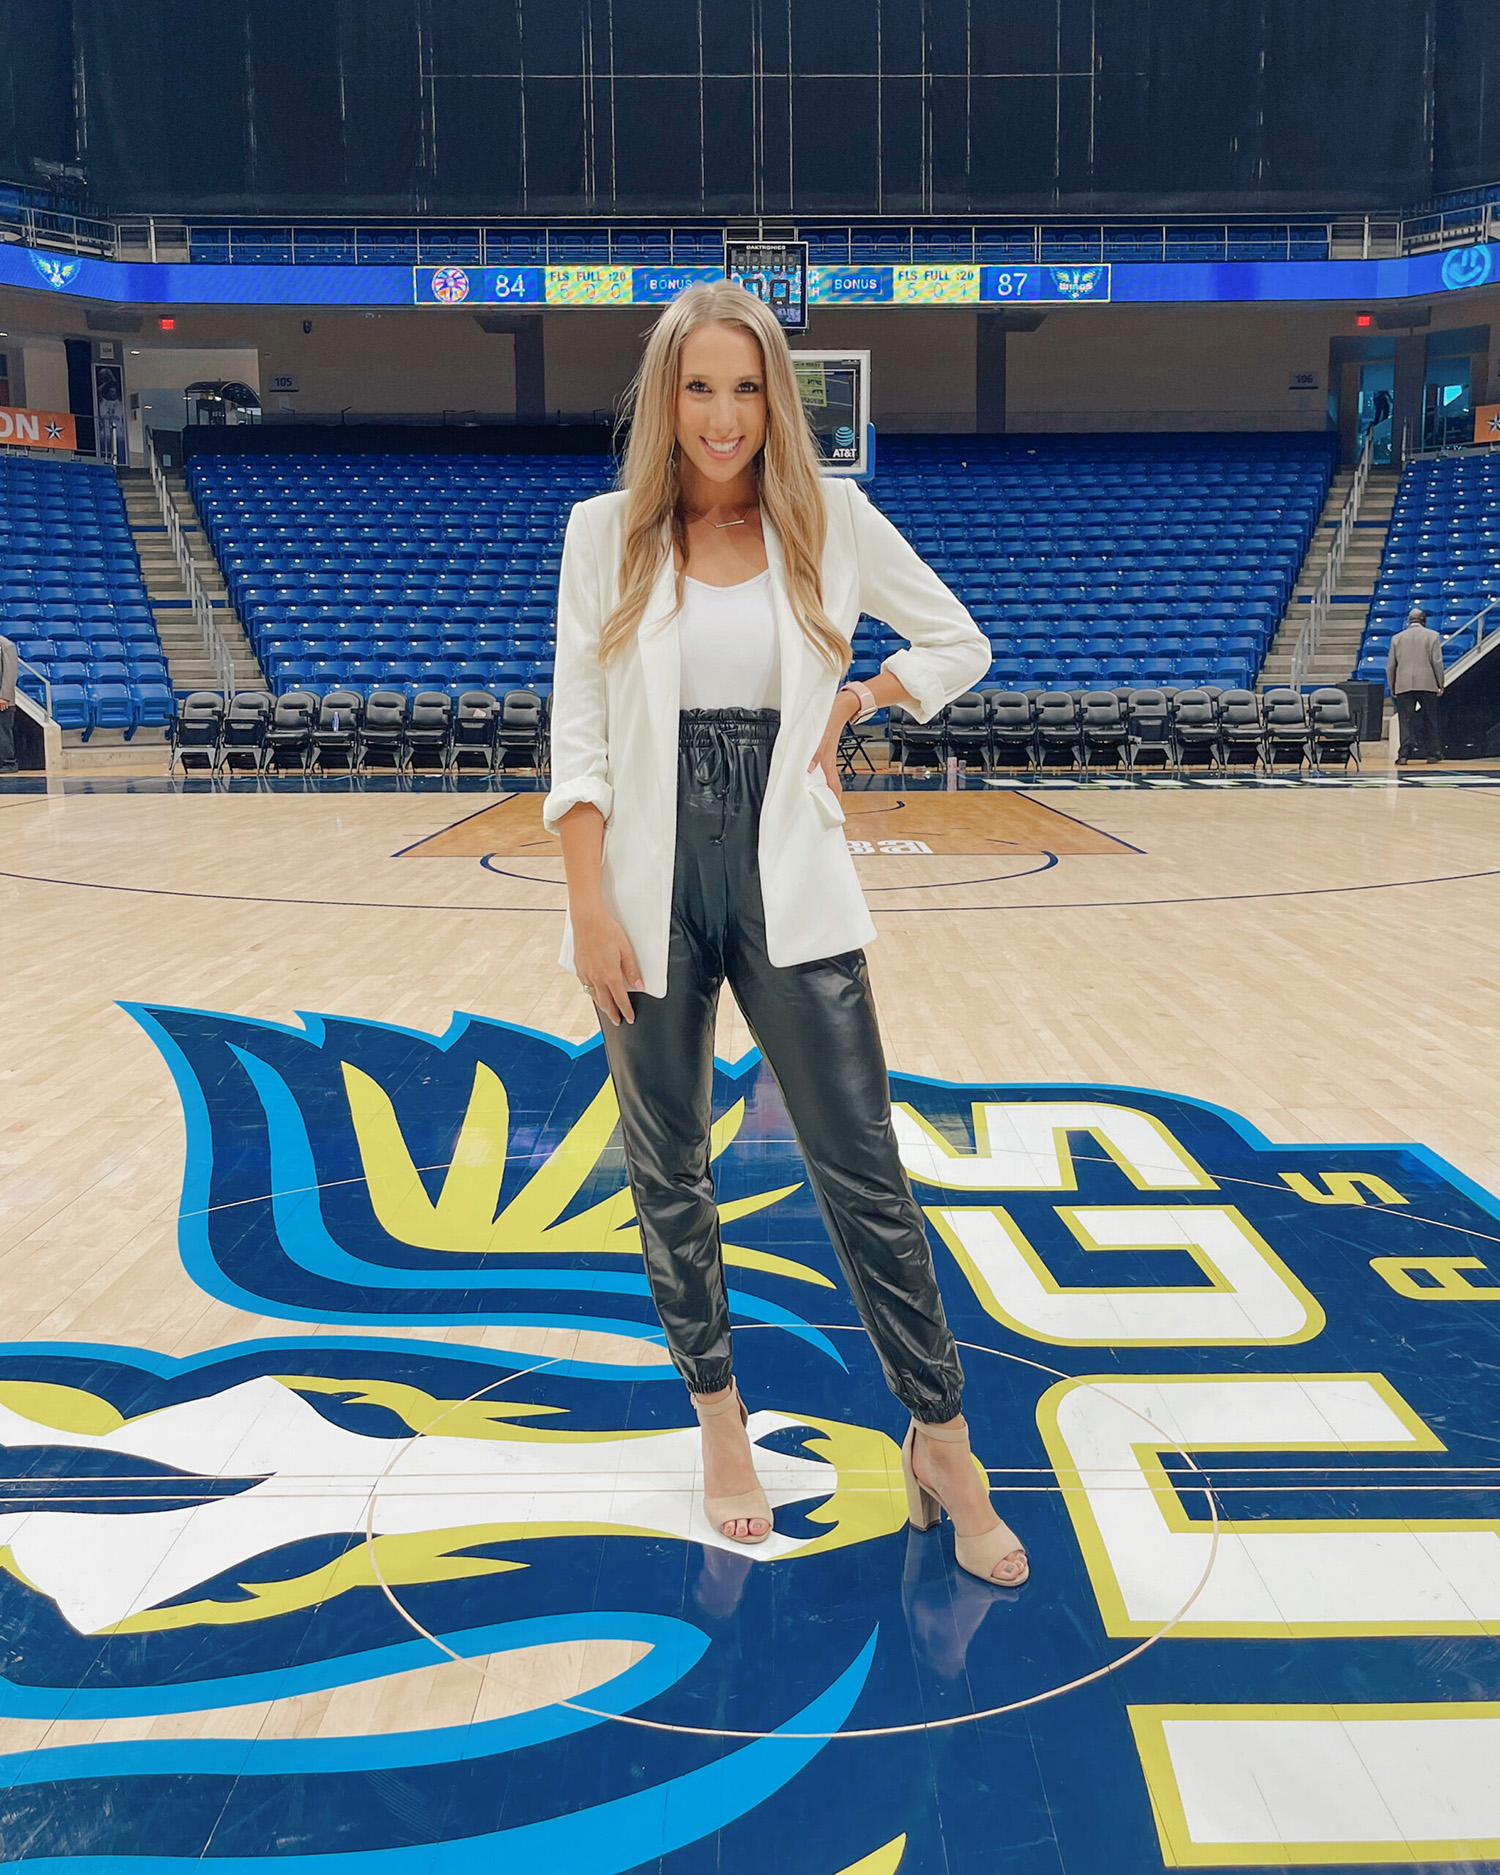 Lia Musgrave ‘19, stands on the floor of the Dallas Wings organization